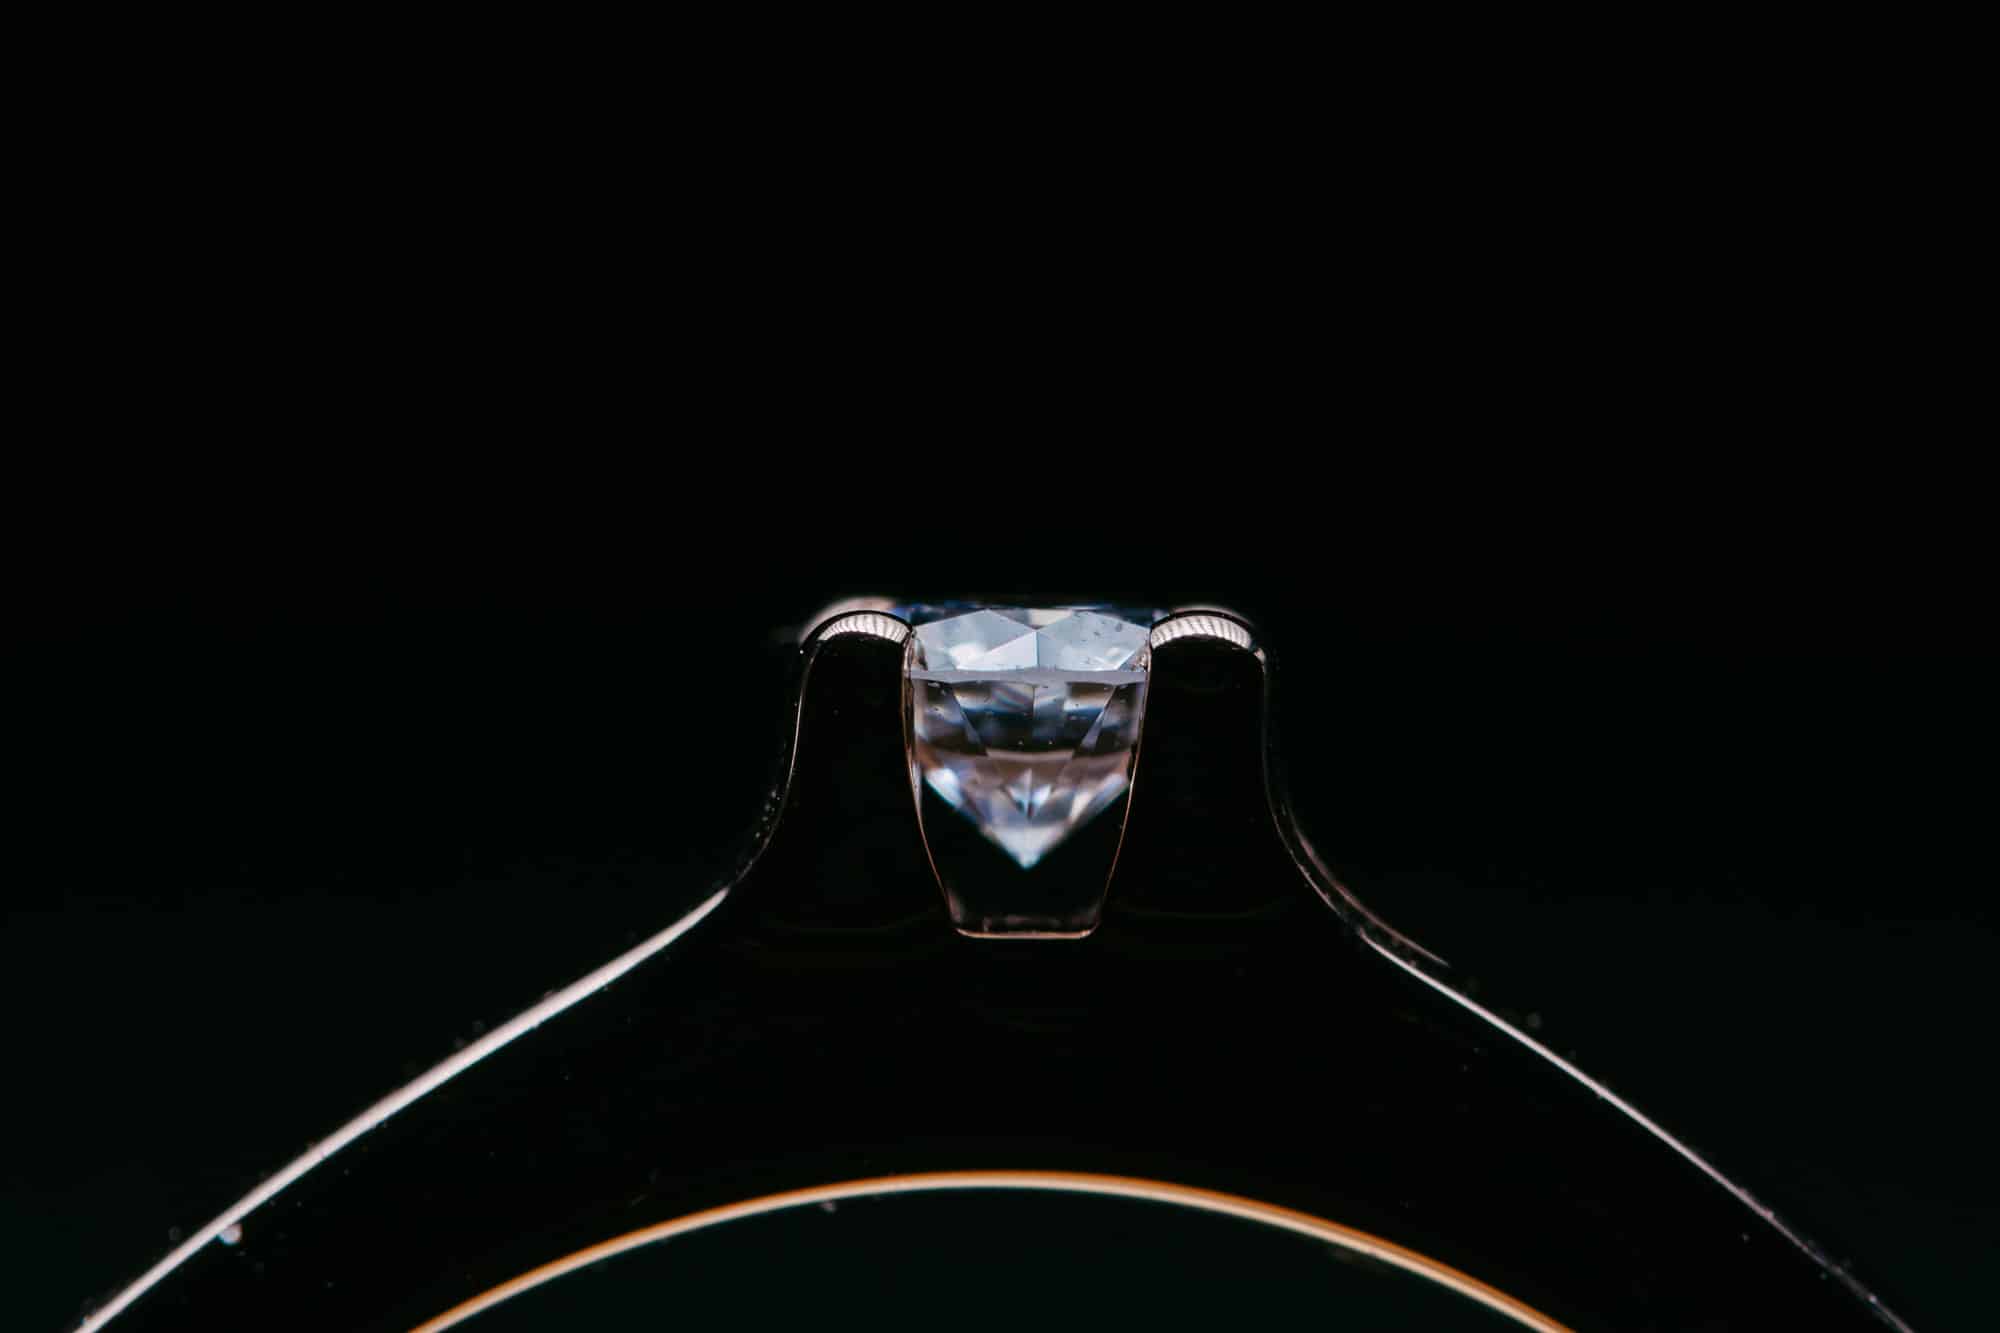 A close-up of an engaged diamond engagement ring on a black background.